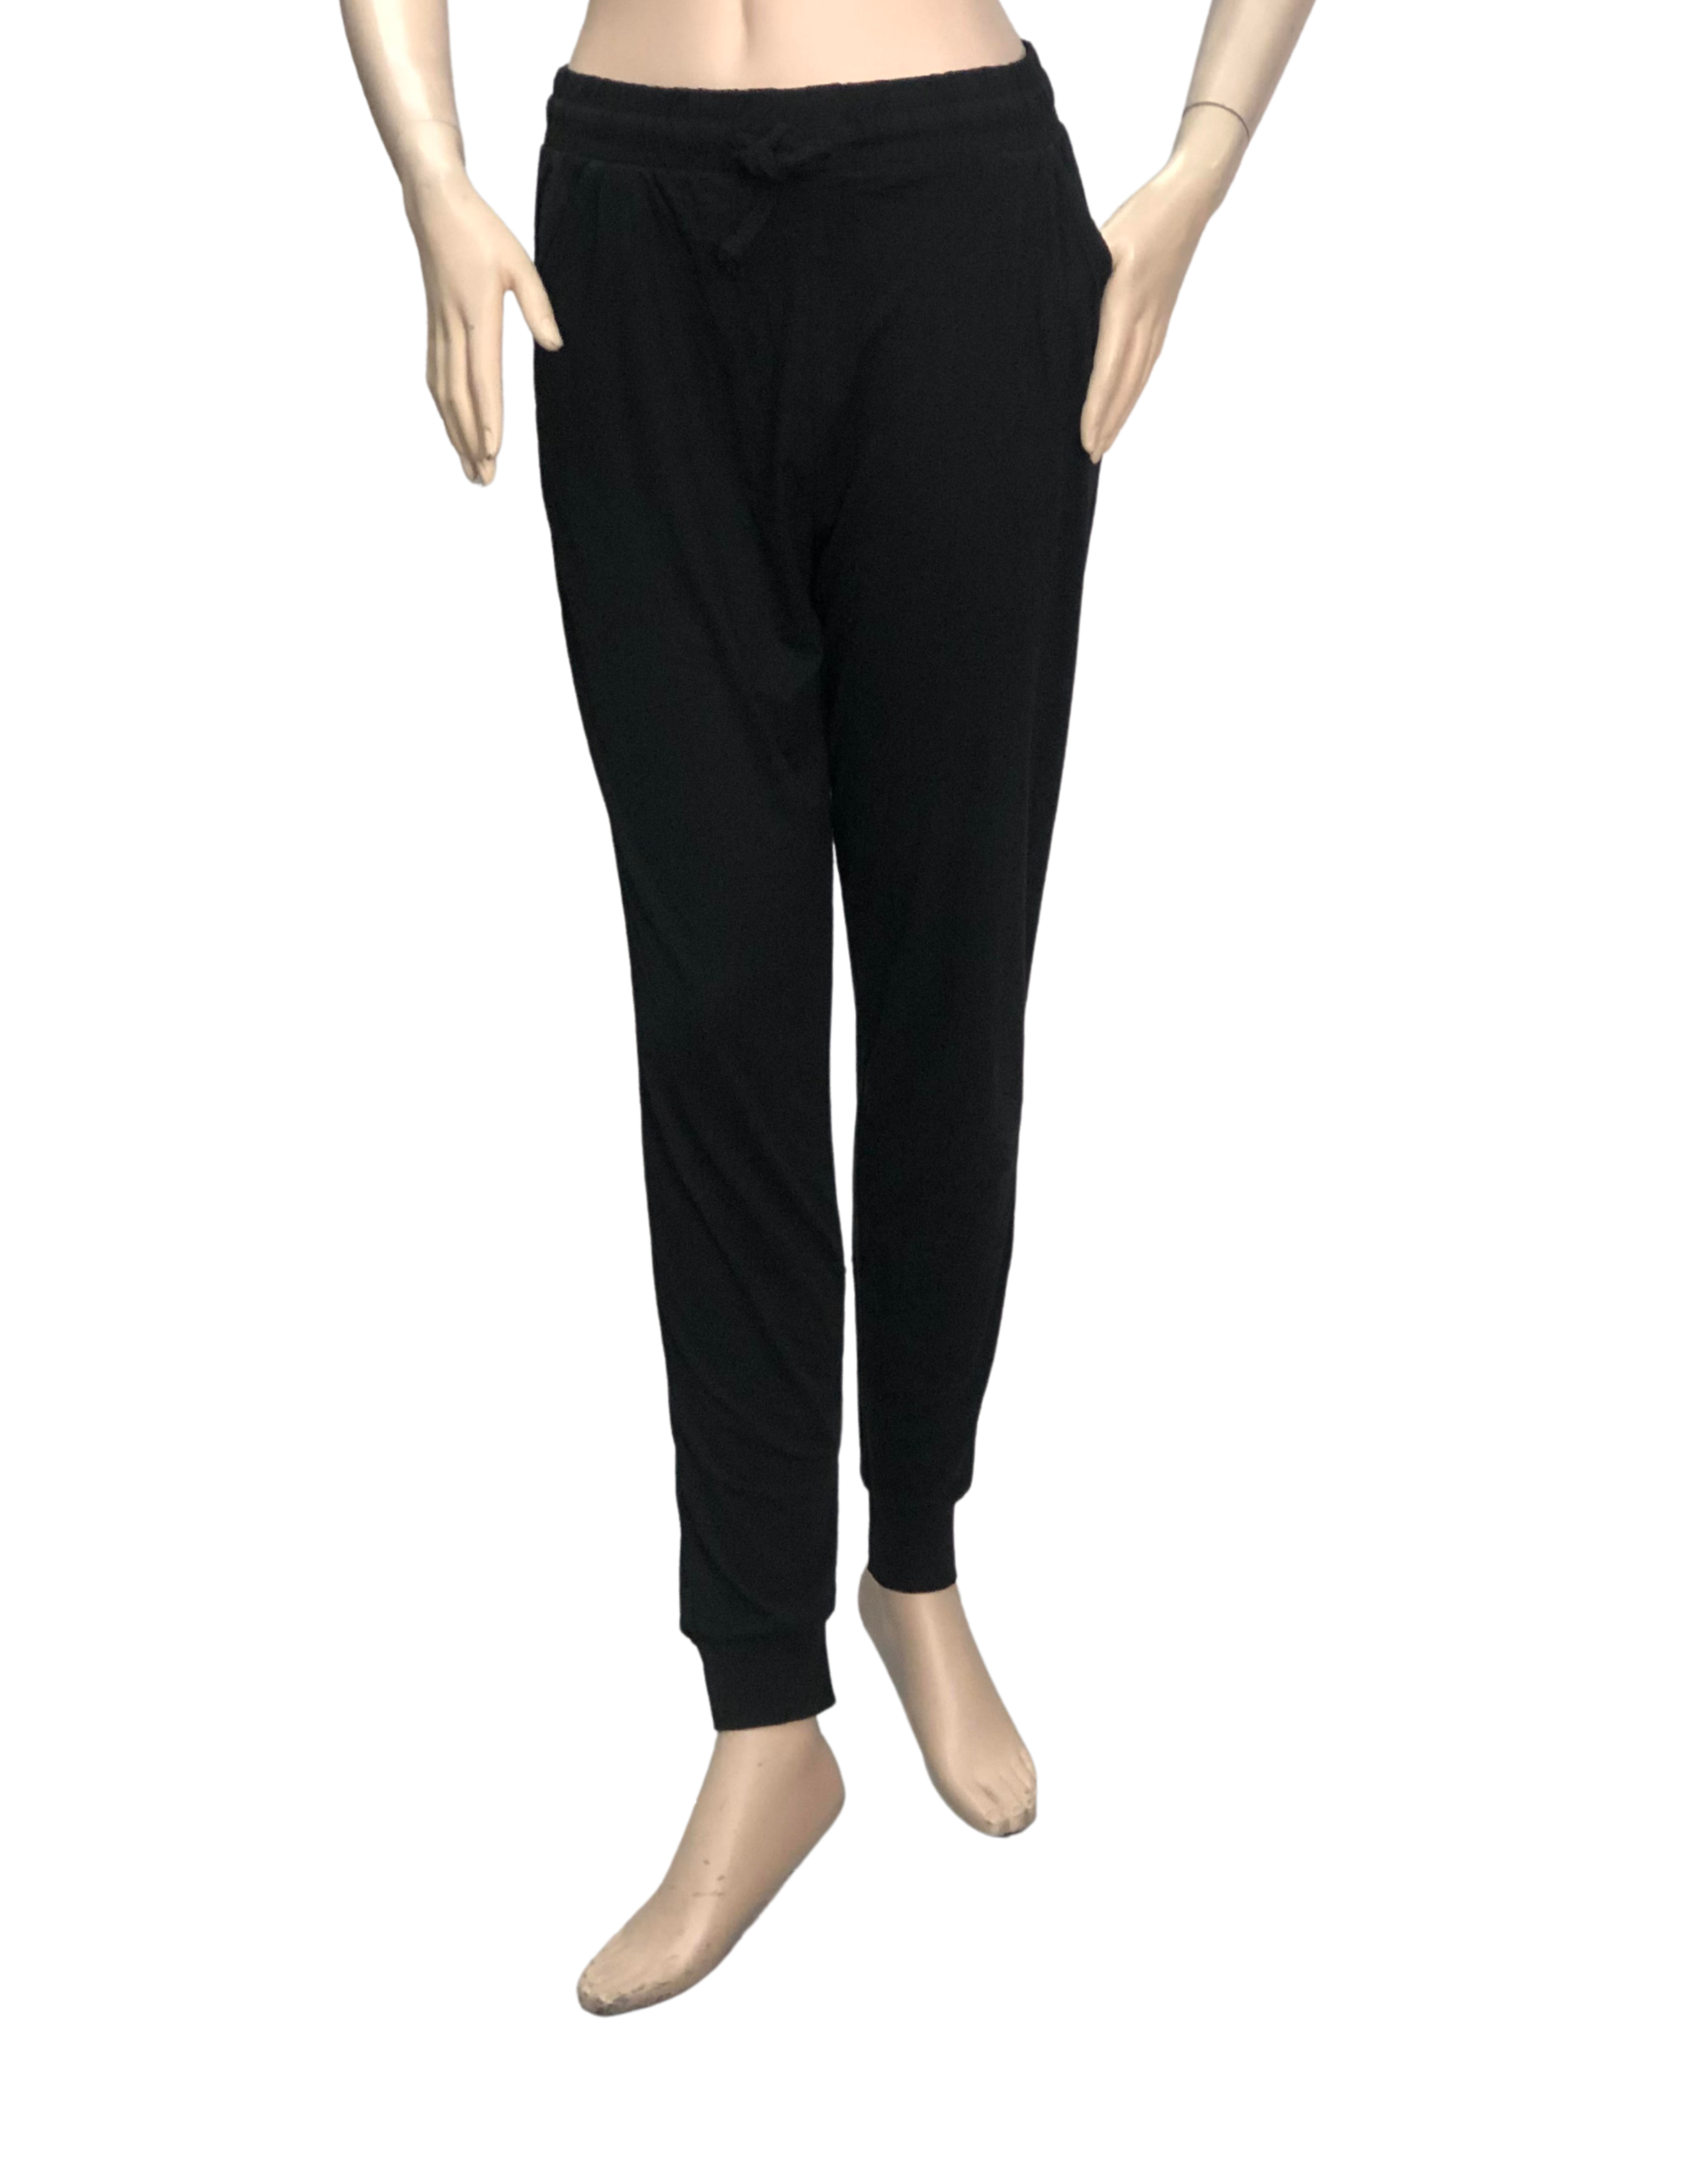 Relaxed-Fit Jogger Pant with pocket - Imported - P219JK